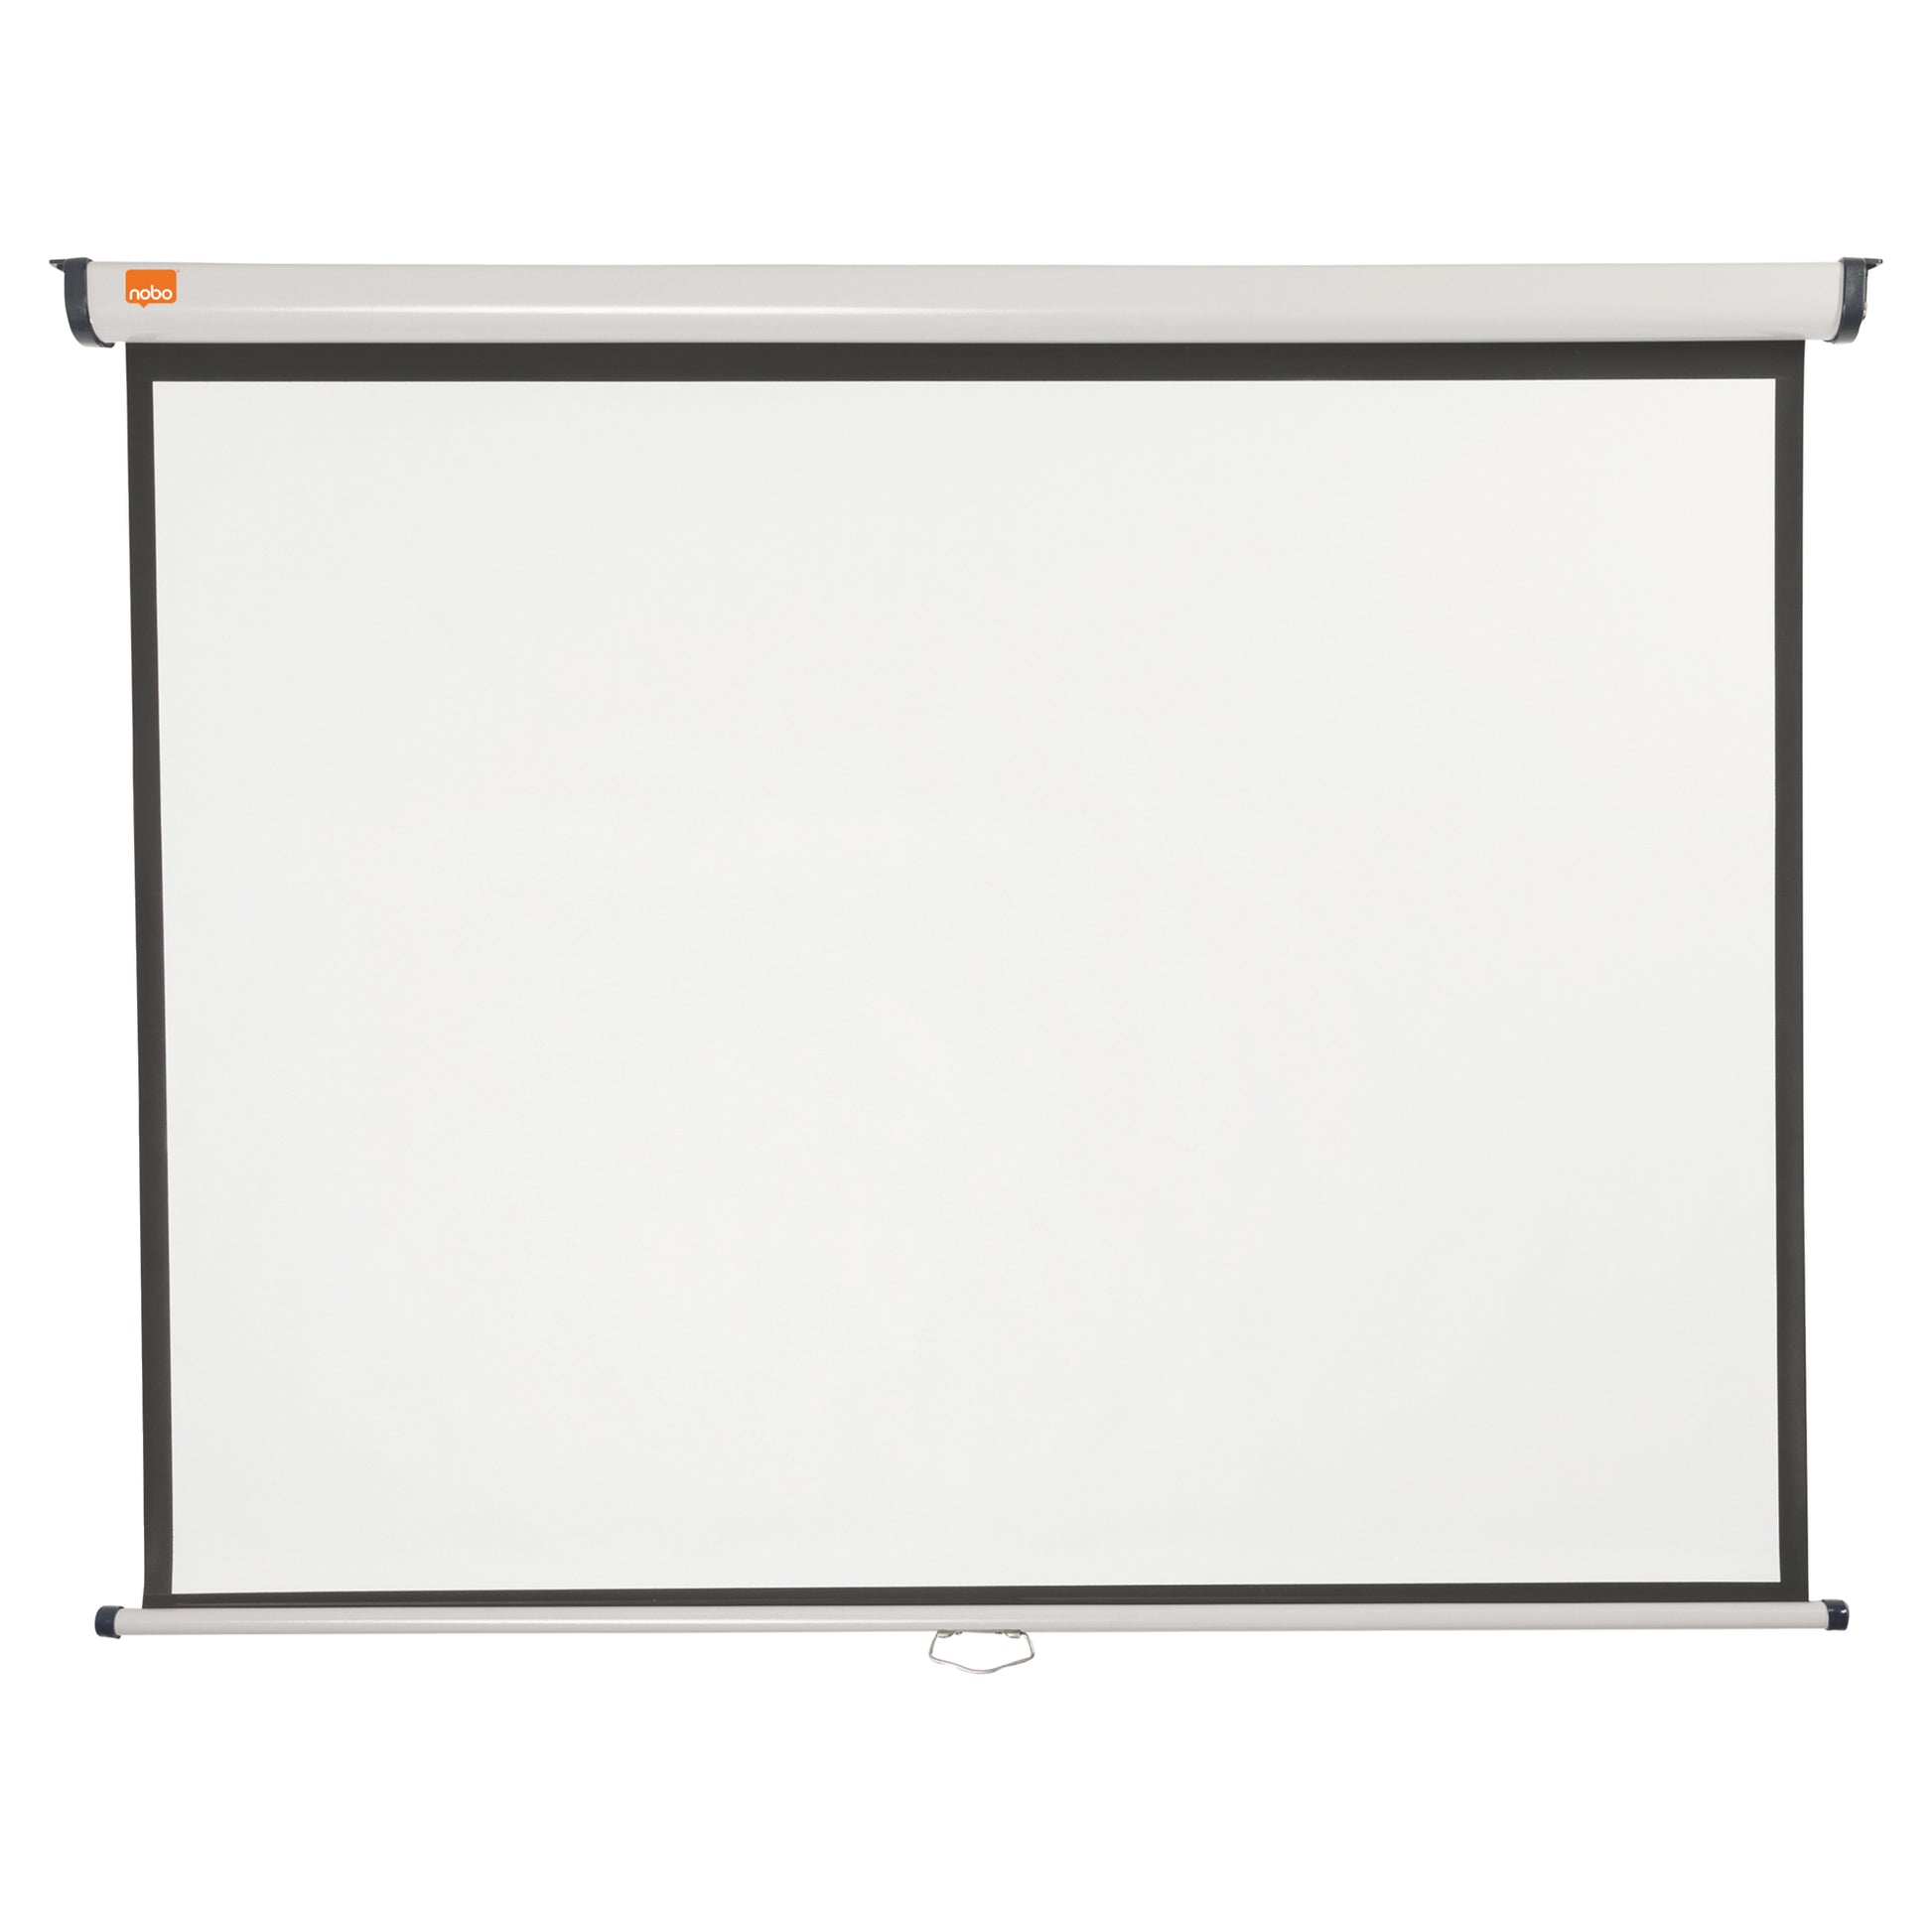 Nobo Wall Projection Screen 1500x1138mm 1902391 - NWT FM SOLUTIONS - YOUR CATERING WHOLESALER